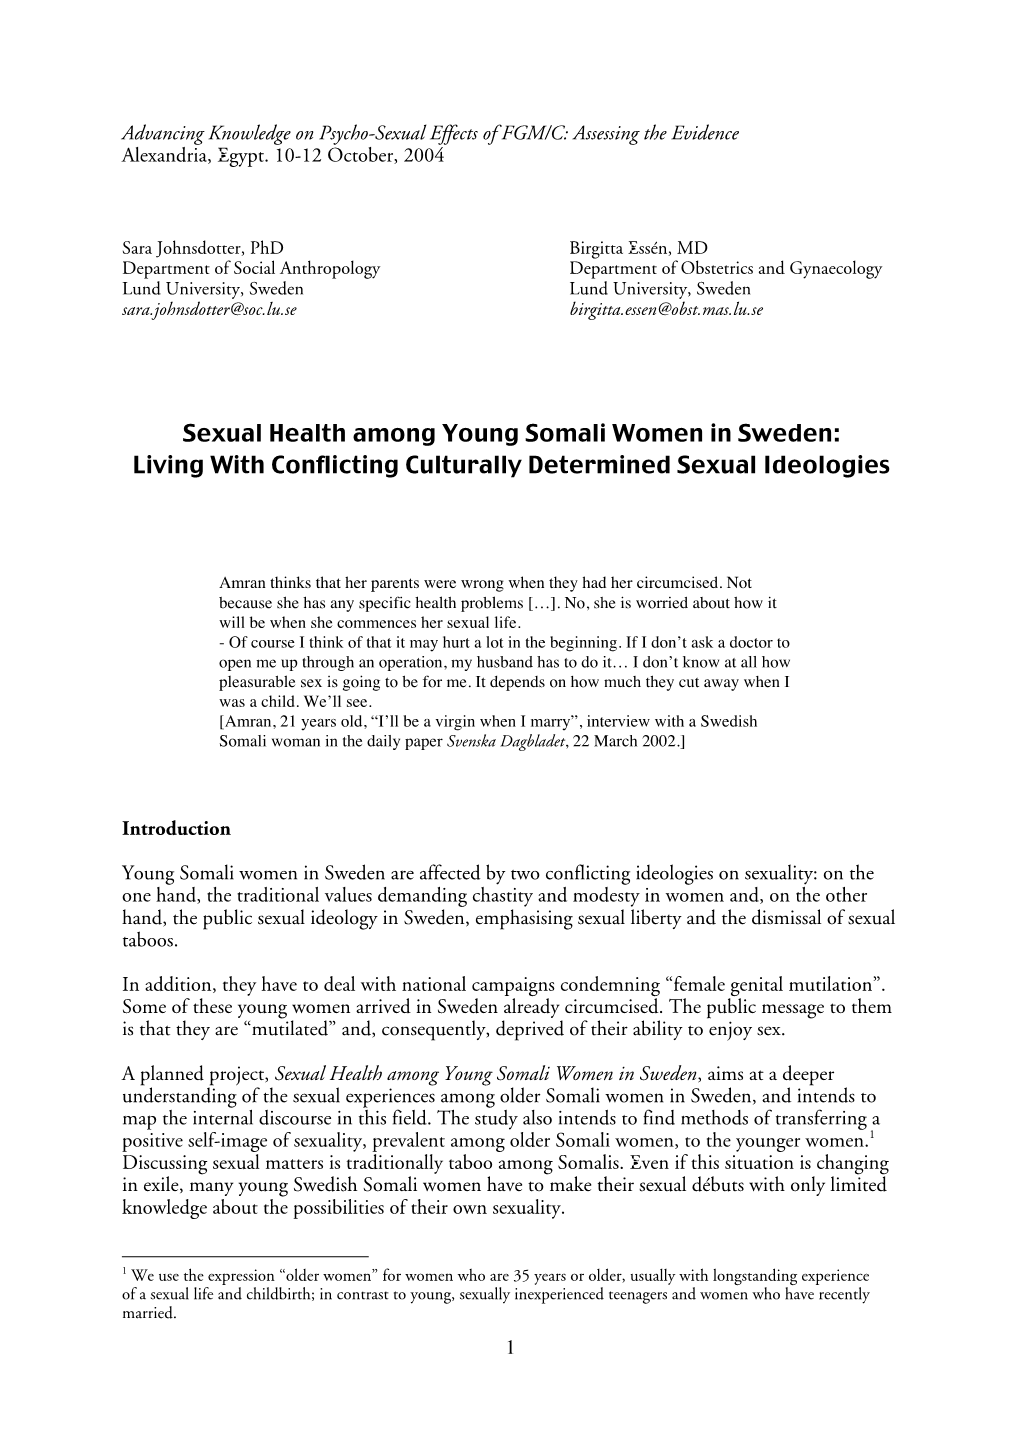 Sexual Health Among Young Somali Women in Sweden: Living with Conflicting Culturally Determined Sexual Ideologies